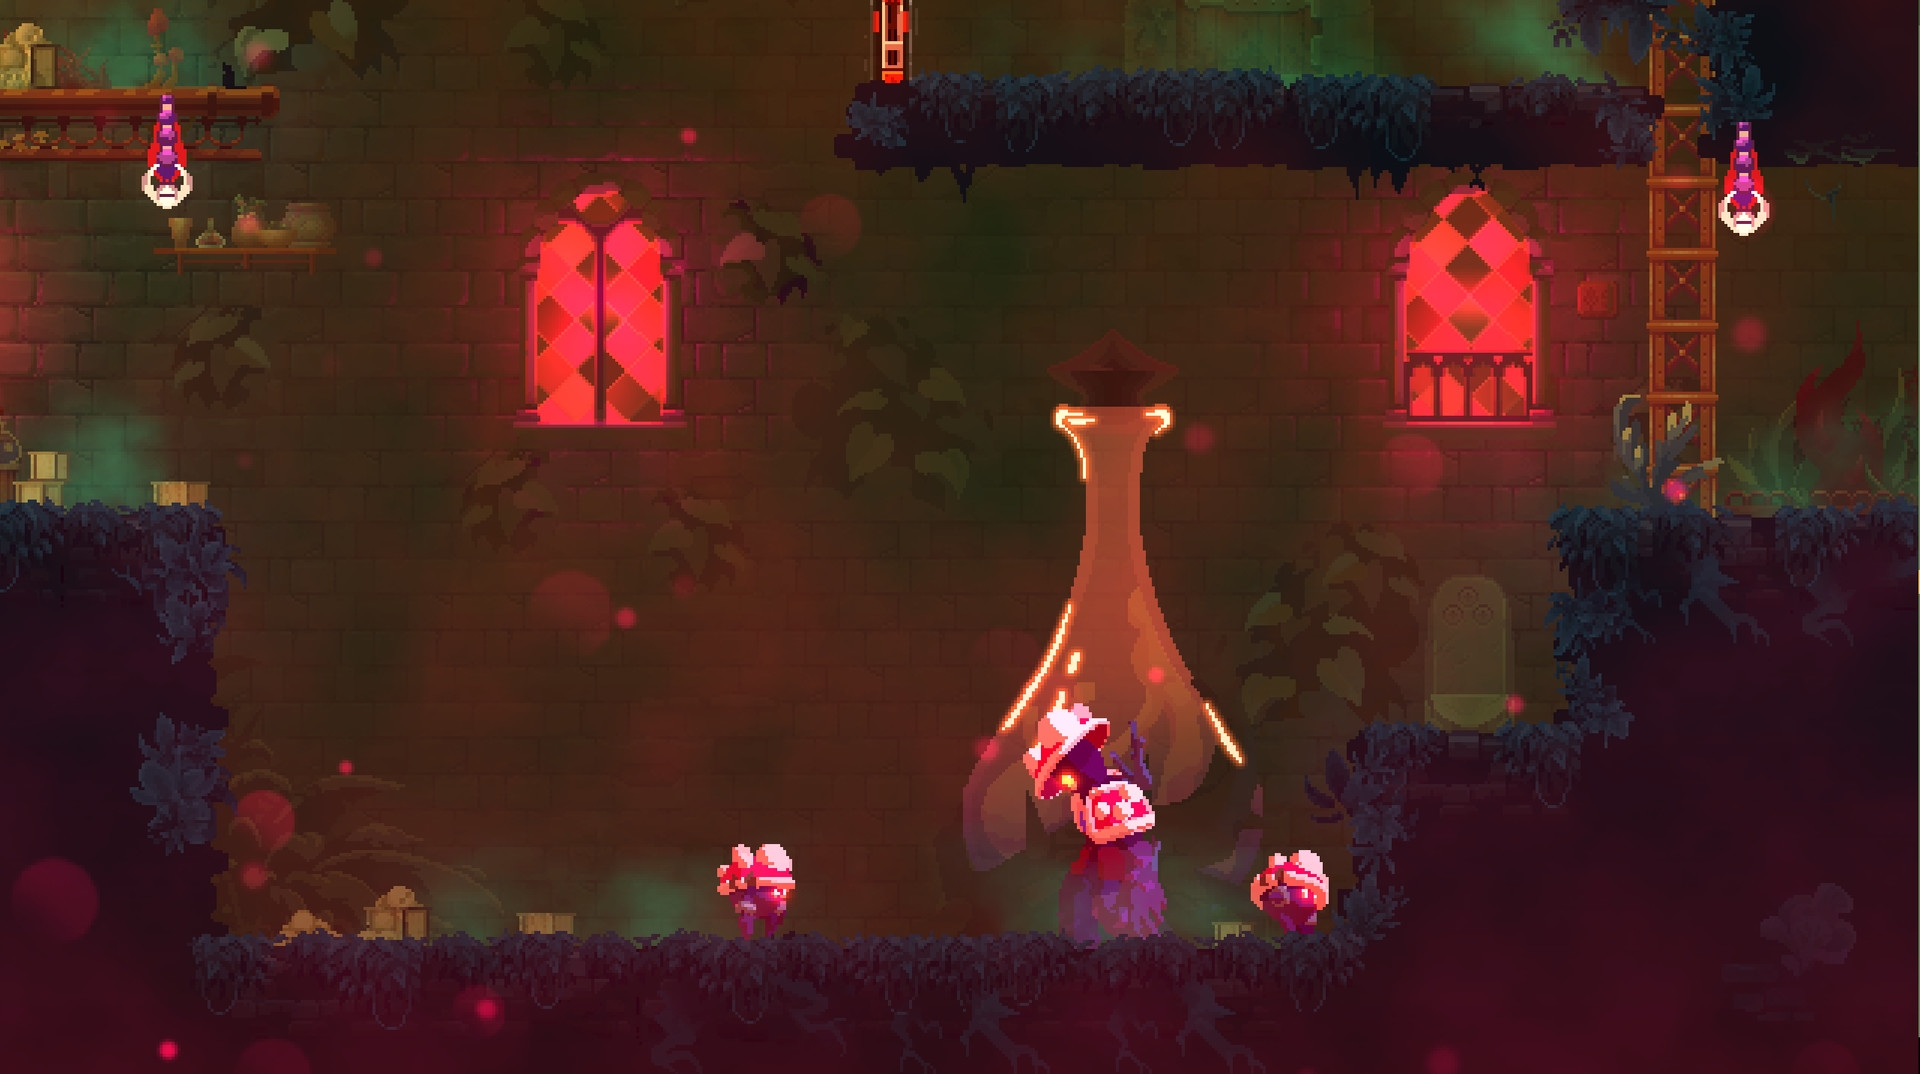 Dead Cells: The Bad Seed | LATAM (42183334-9368-4f71-8def-06ca52c21903)